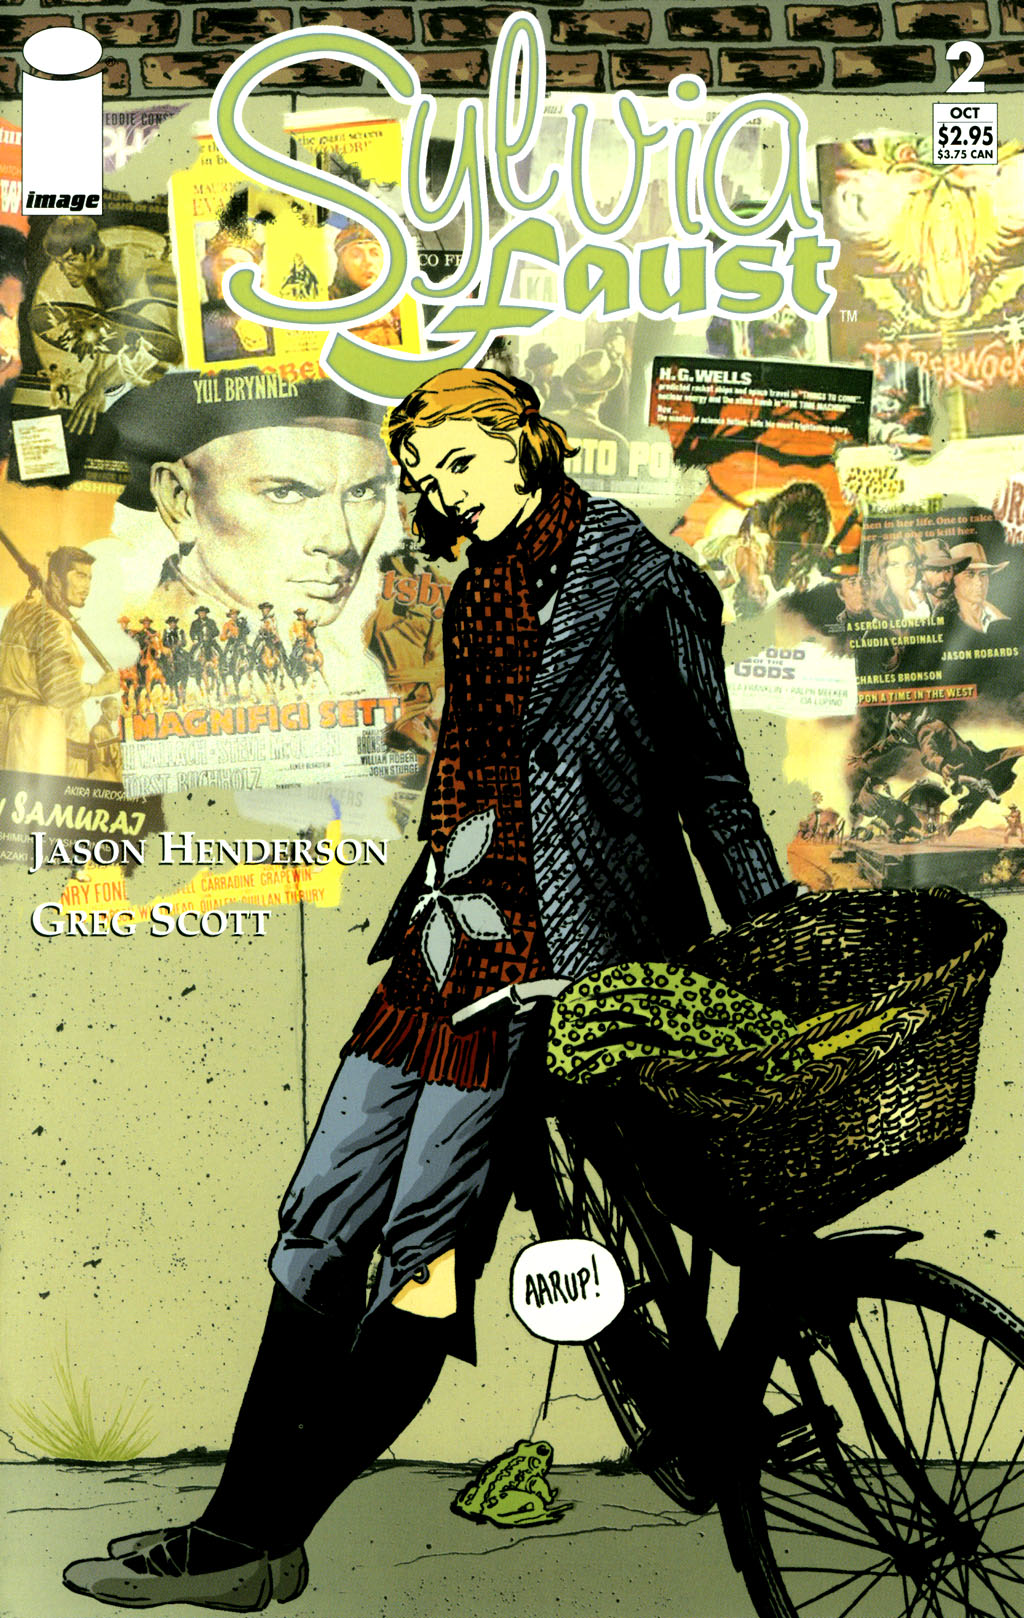 Read online Sylvia Faust comic -  Issue #2 - 1